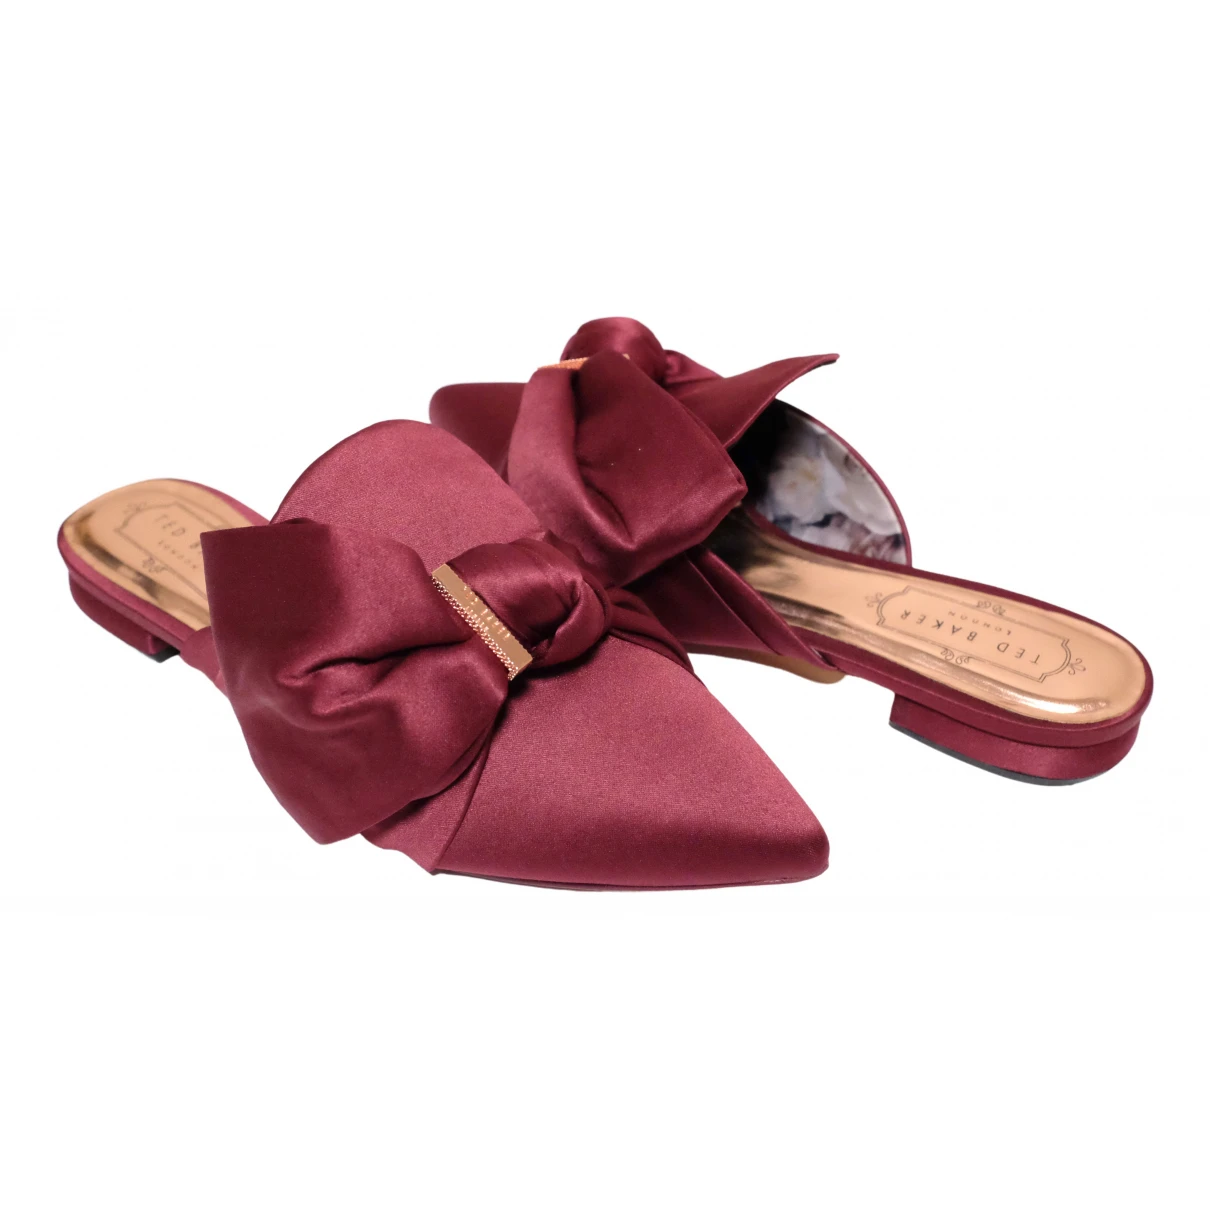 shoes Ted Baker sandals for Female Cloth 3 UK. Used condition